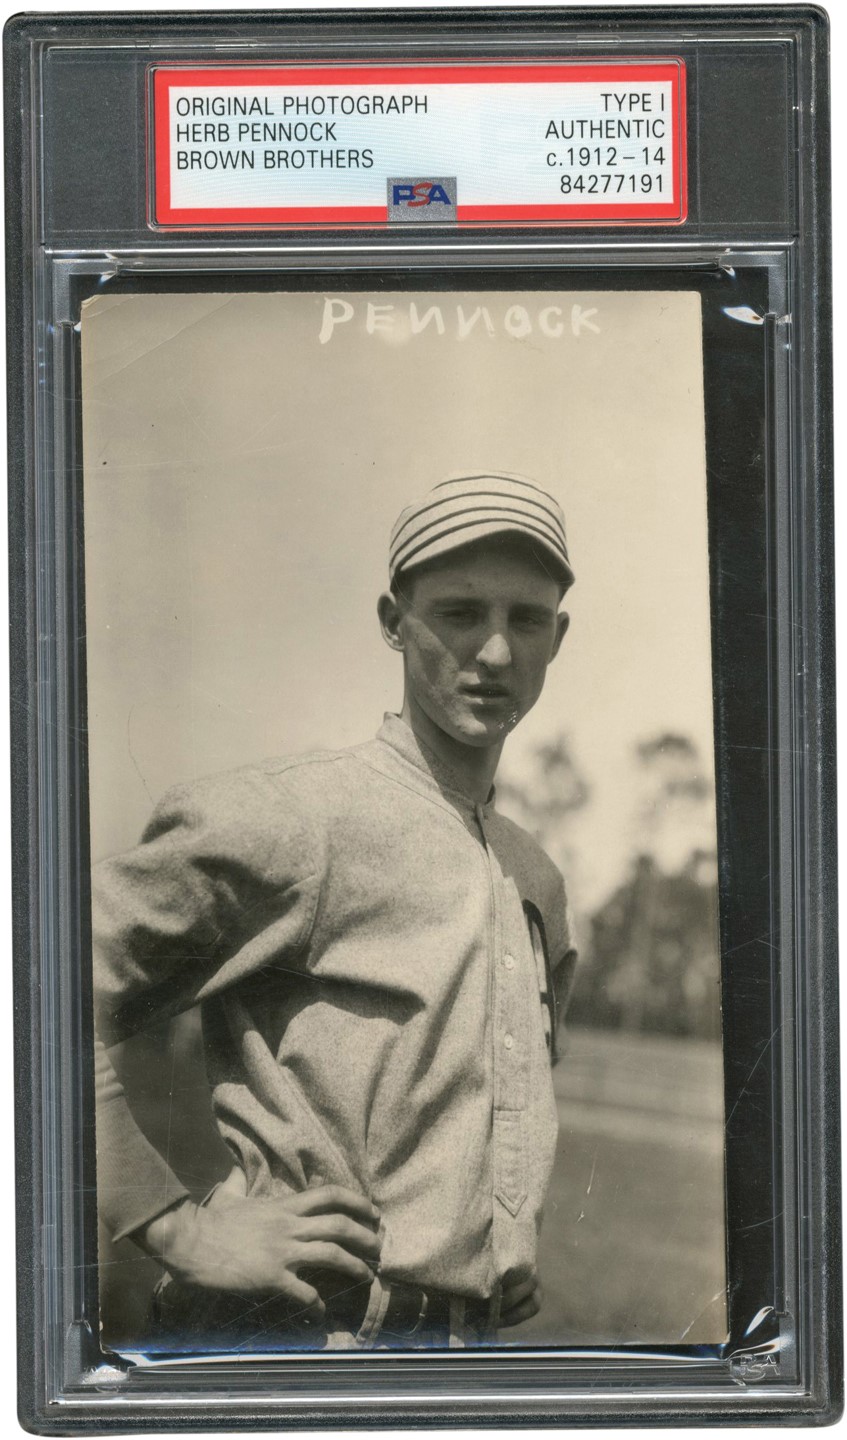 The Brown Brothers Collection - Early Herb Pennock Philadelphia Athletics Photograph (PSA Type I)